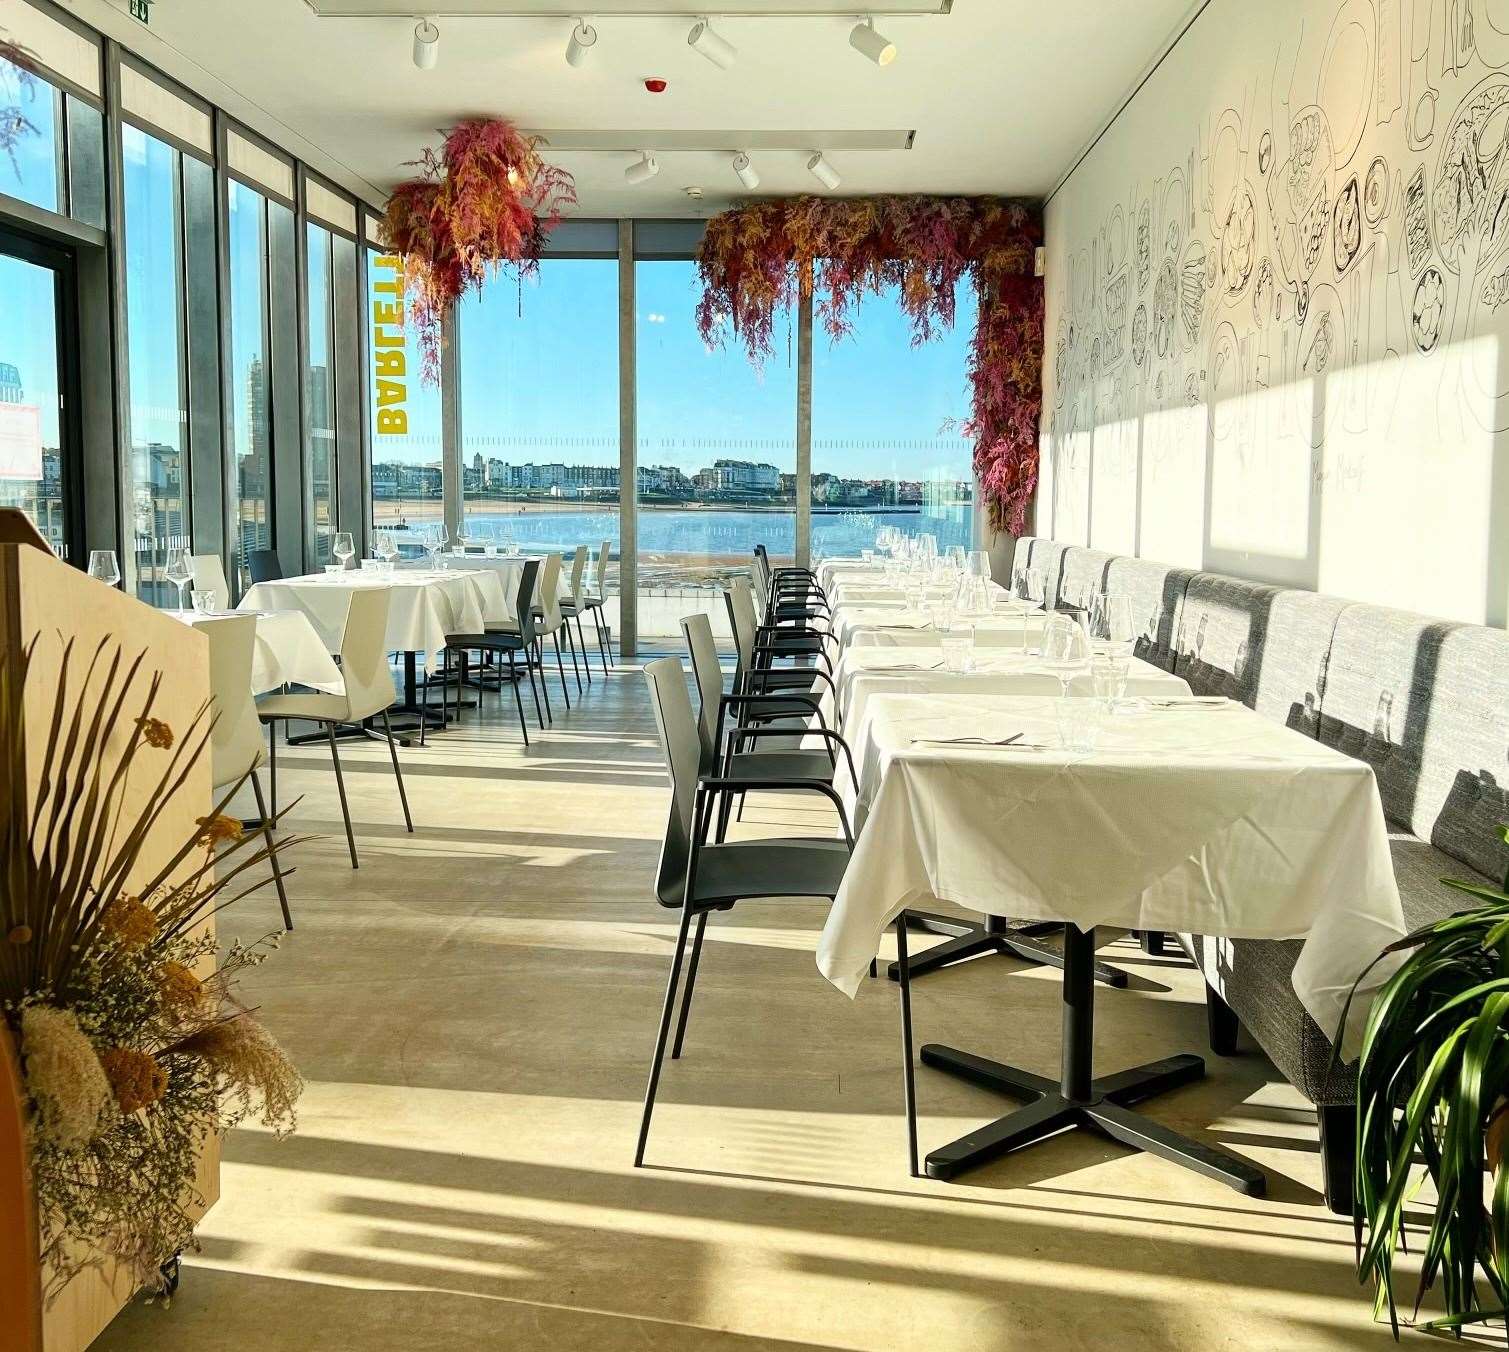 Barletta has been open since 2019 and is found inside the Turner Contemporary. Picture: Natalia Ribbe